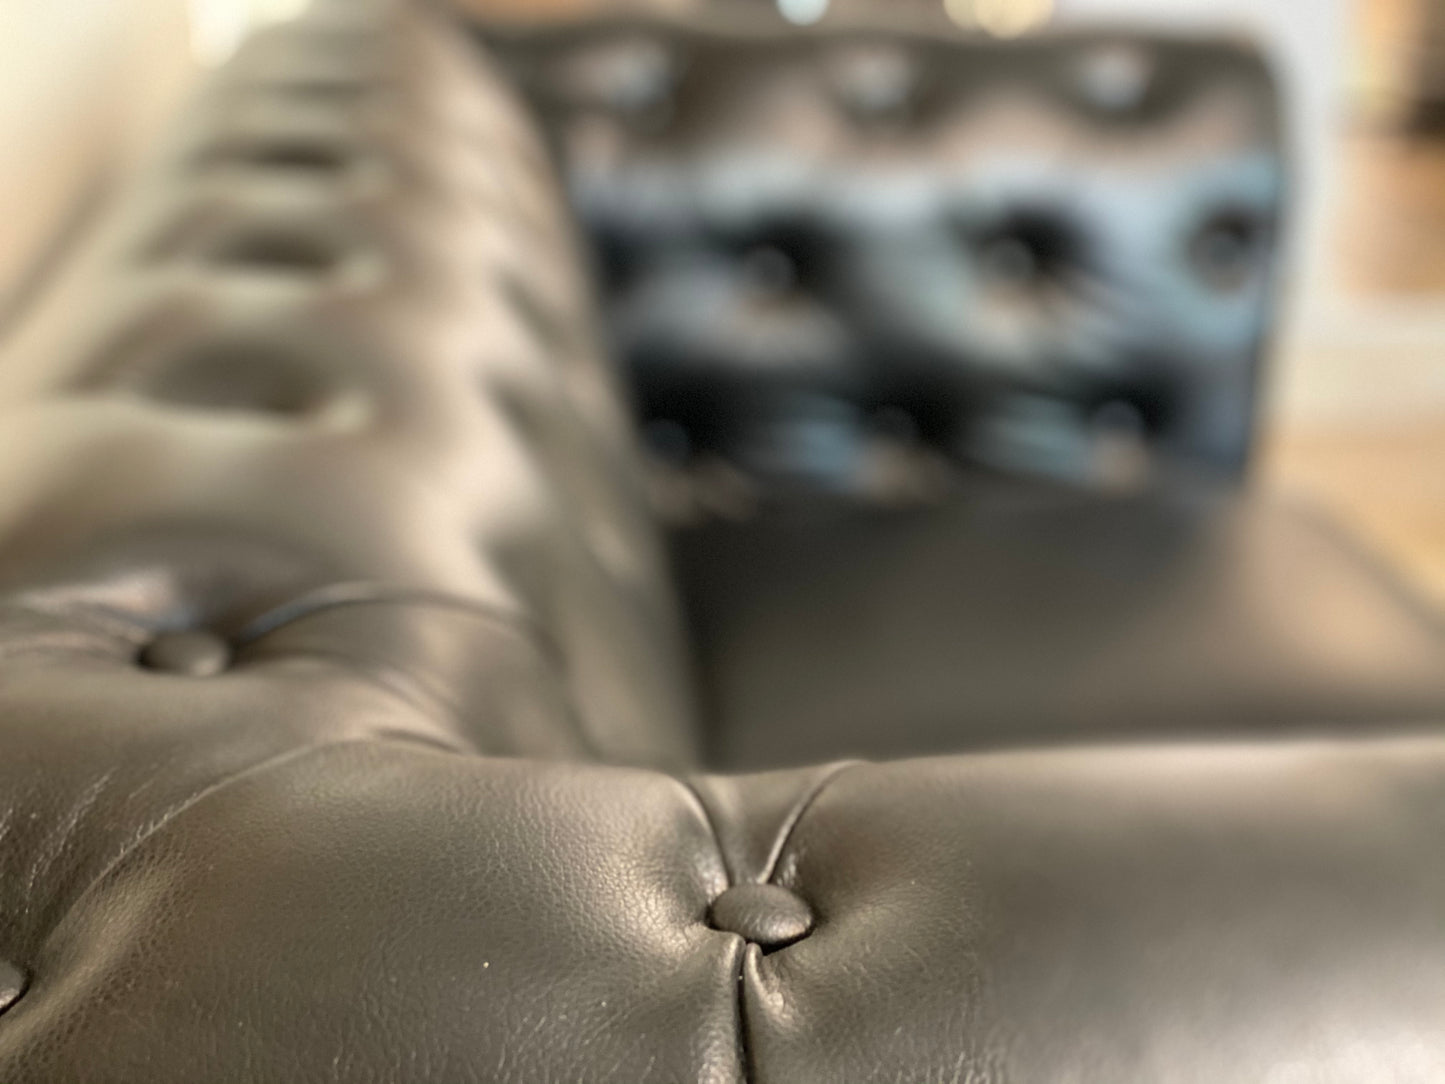 2 Seater Chesterfield Lounge - Black